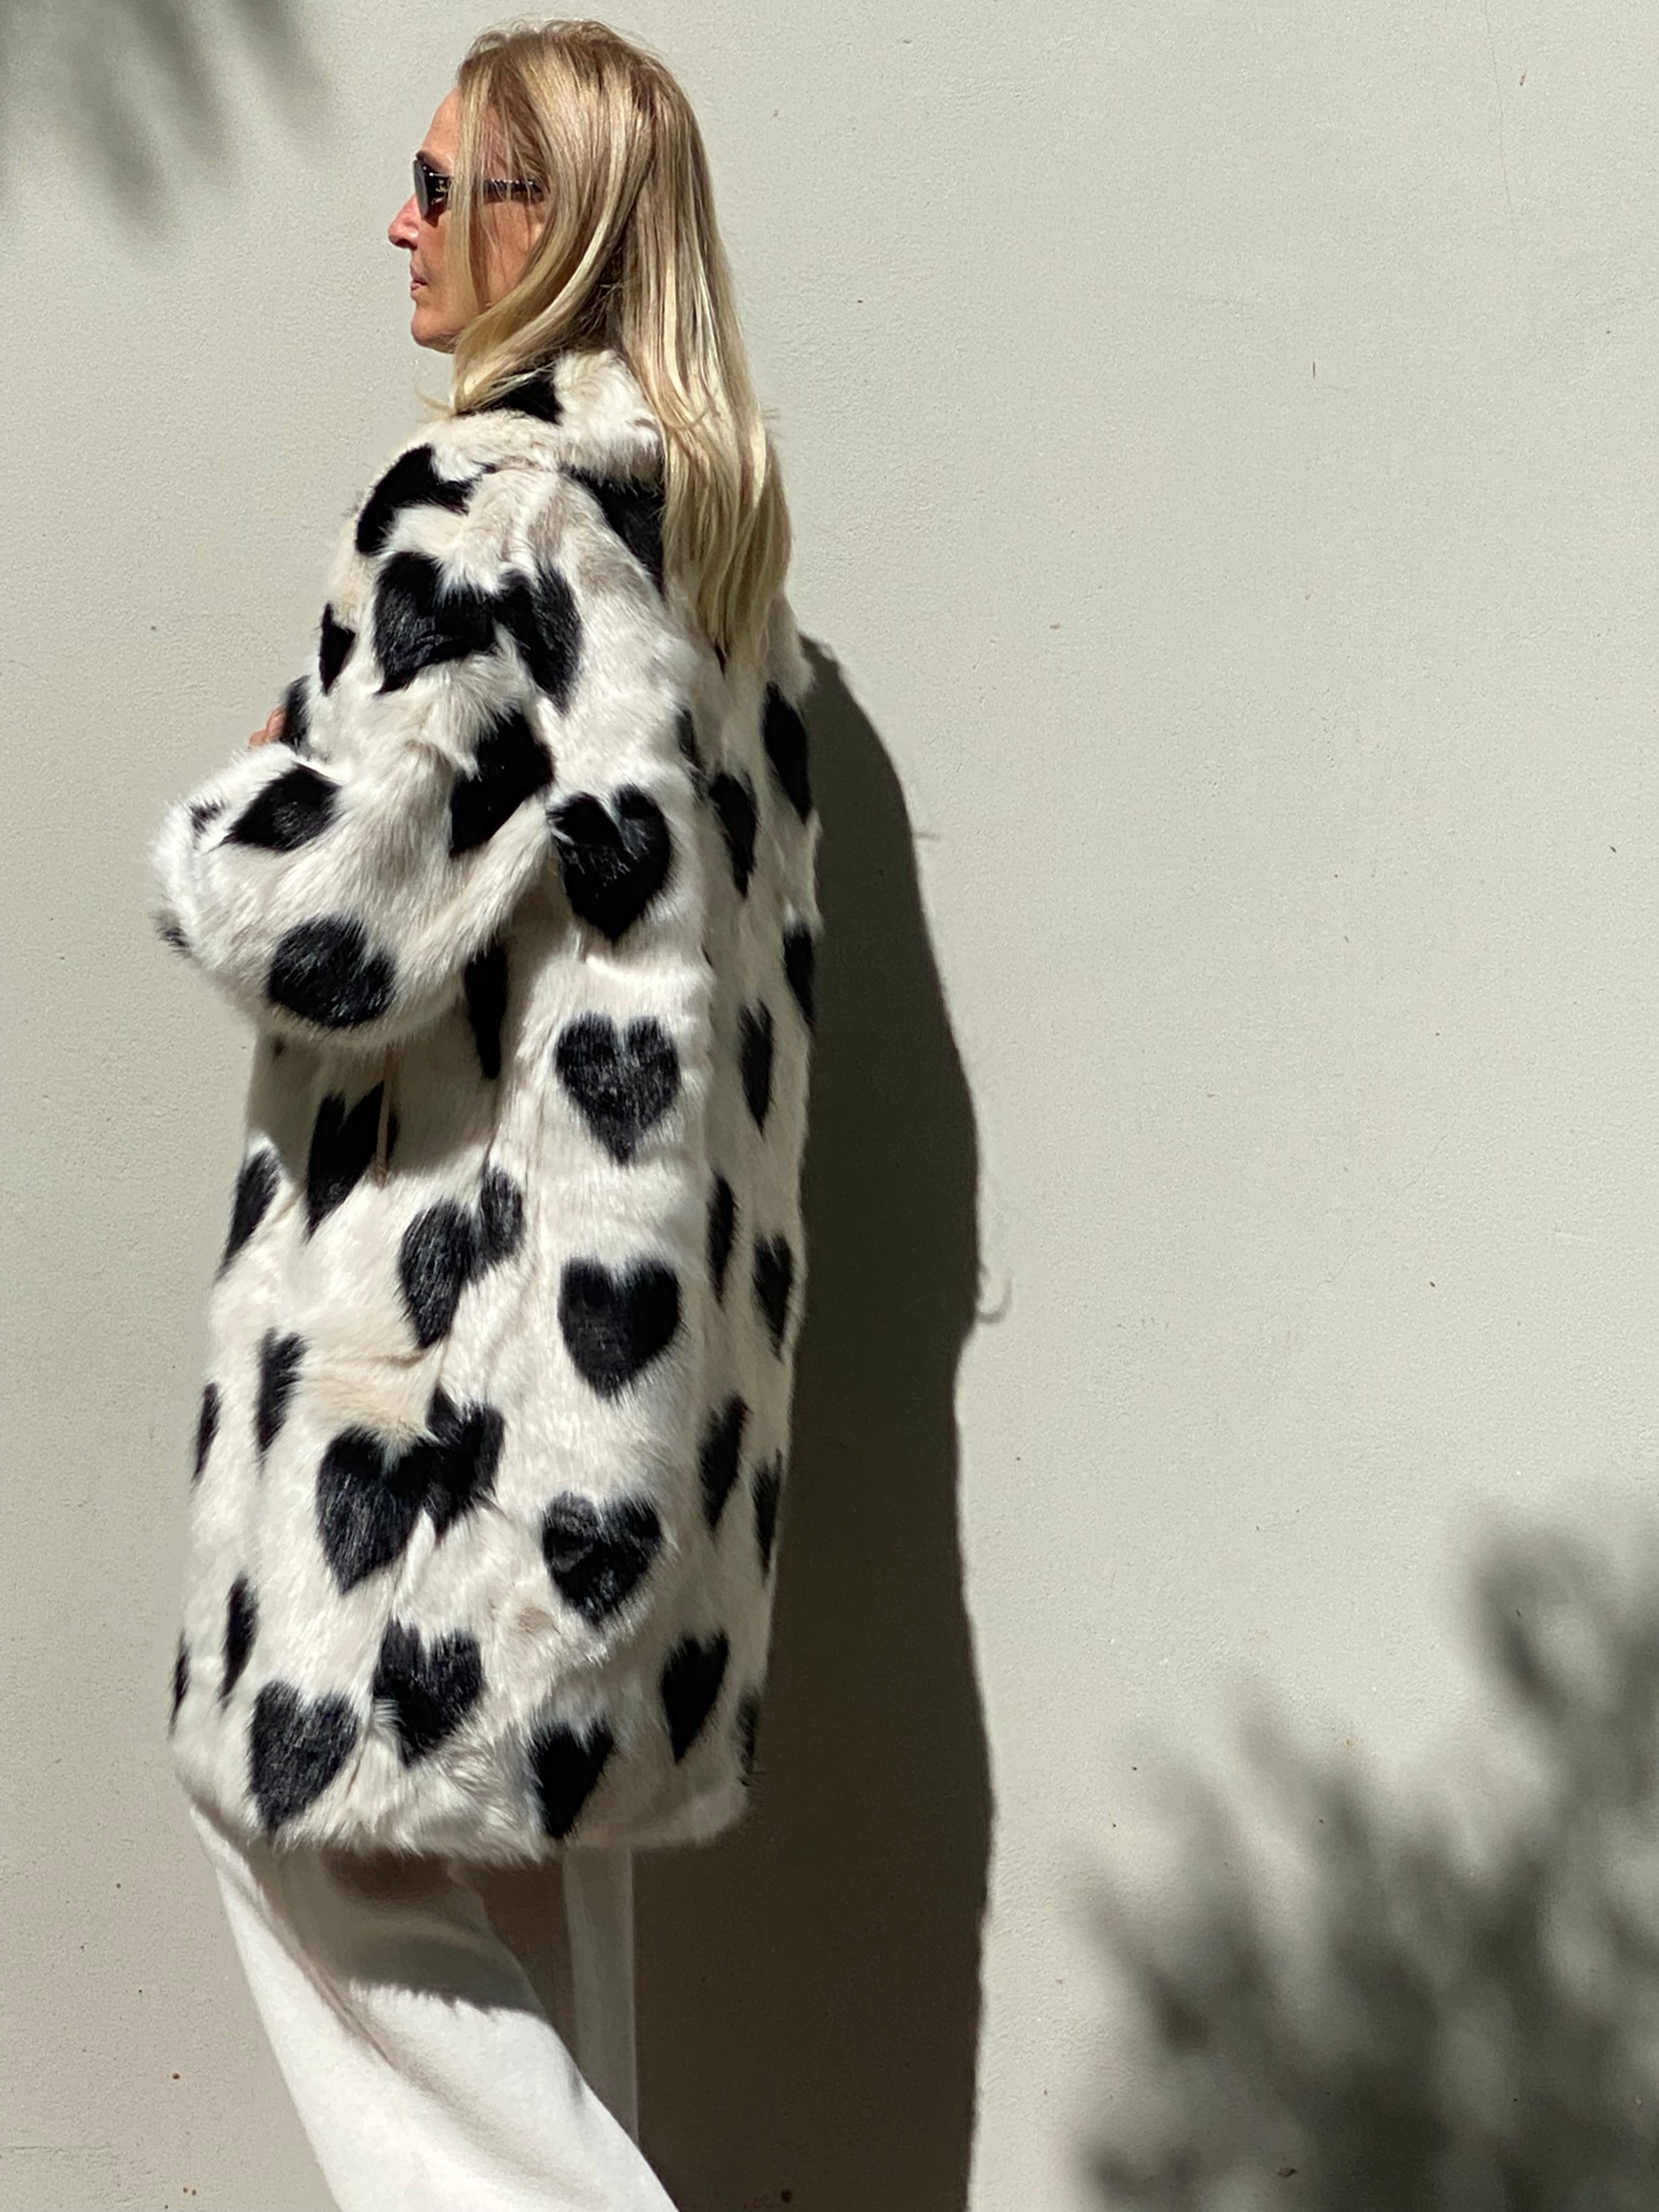 Faux fur coat with hearts, LIMITED EDITION